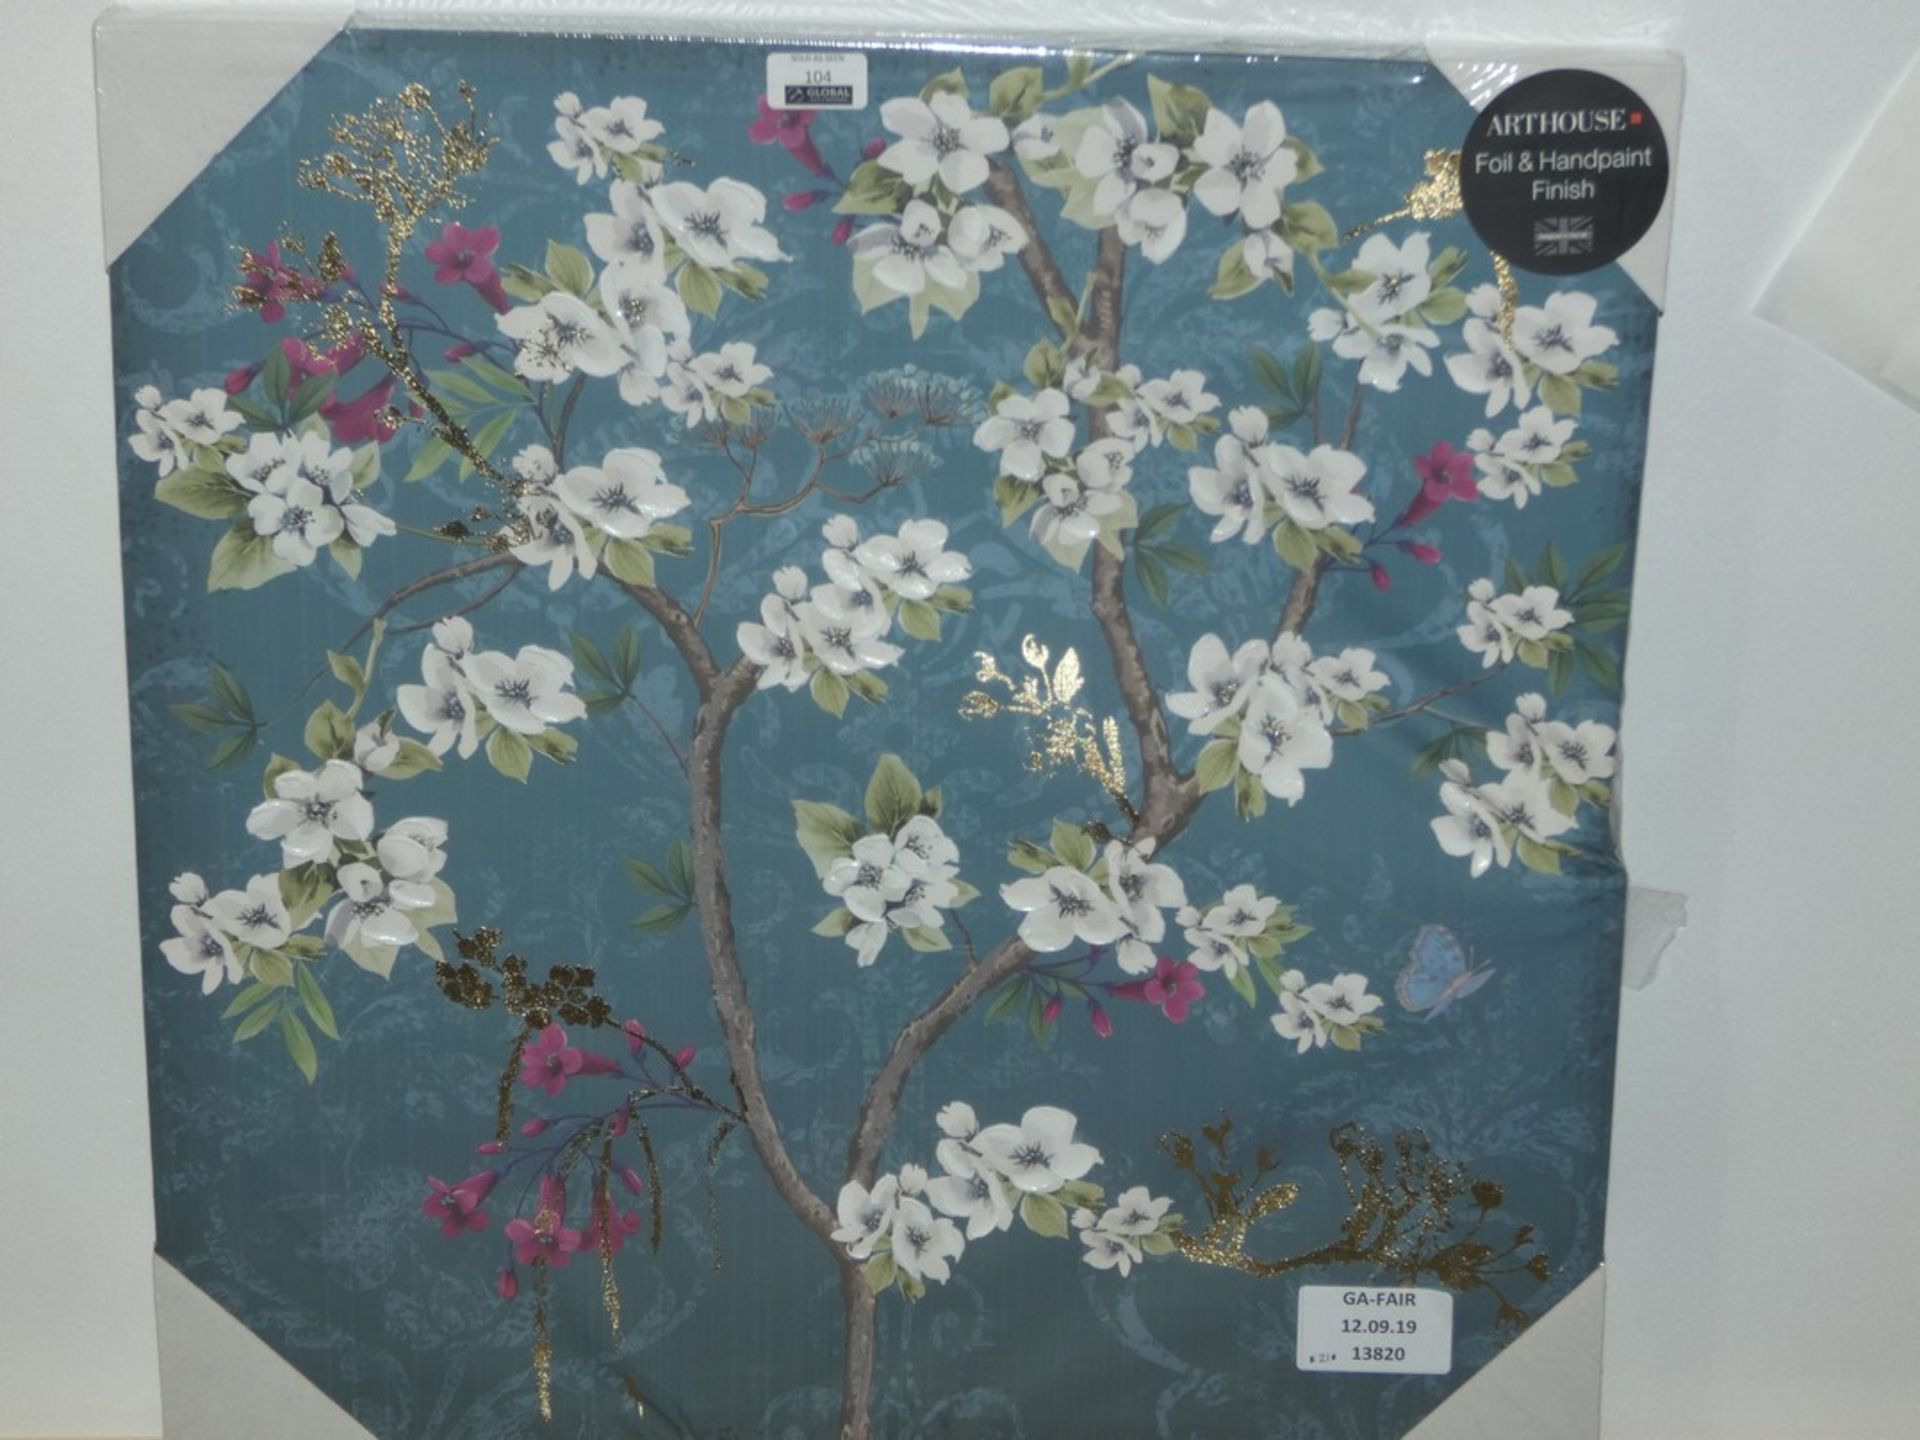 Arthouse Kaysha Blossom Hand Painted Foil Canvas RRP £50 (13820) (Public Viewing and Appraisals